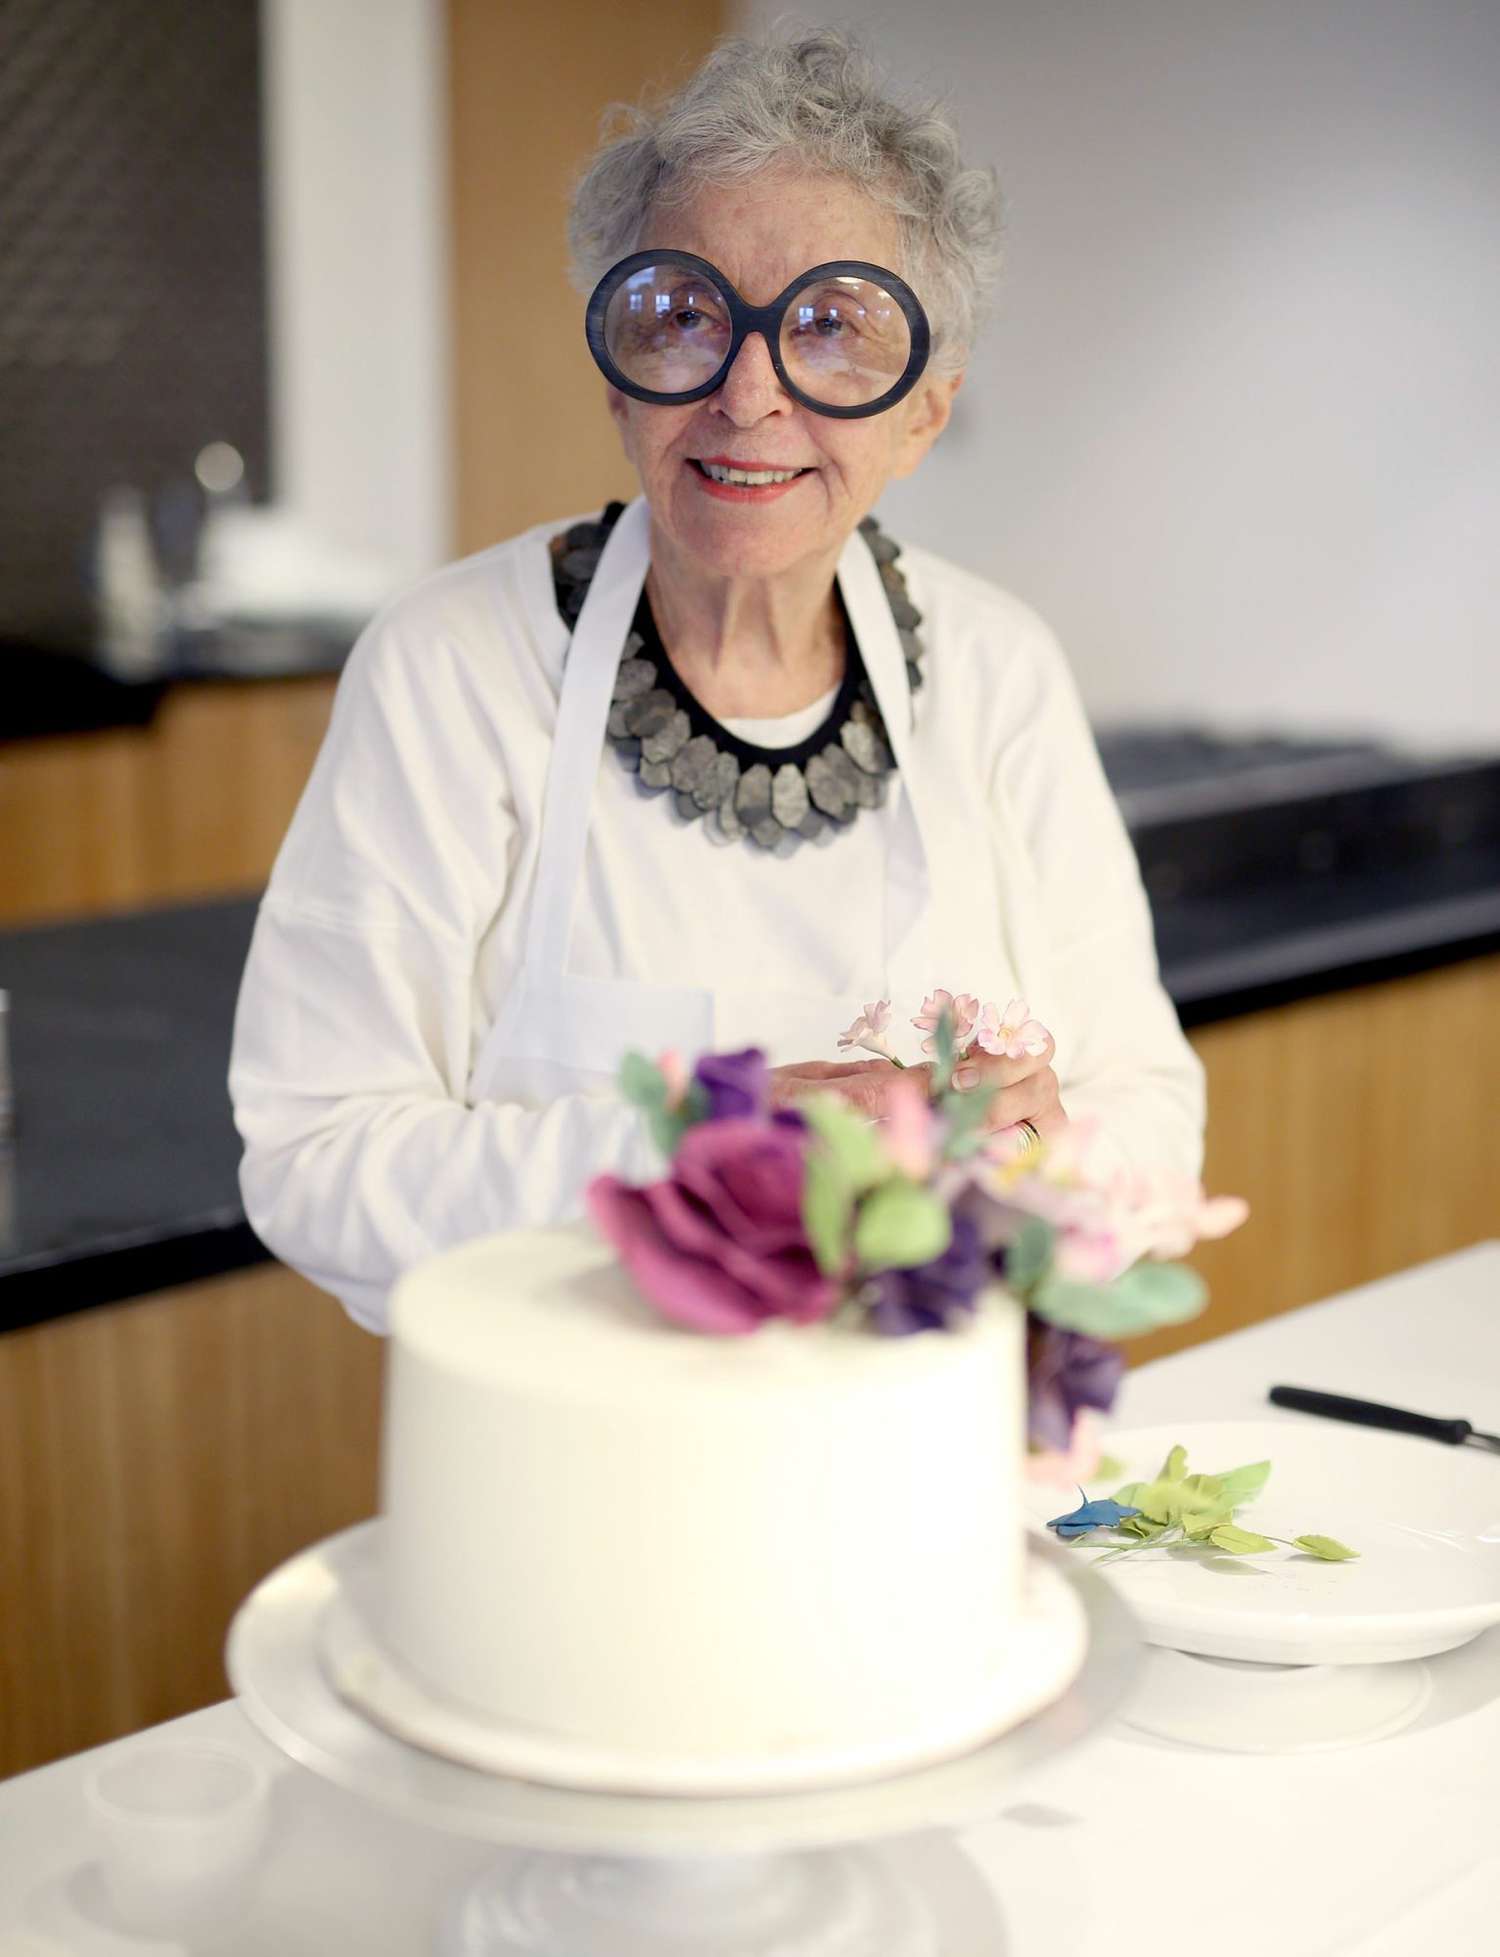 NEW YORK, NY - OCTOBER 16: Sylvia Weinstock hosts Cake Decorating Master Class at Institute of Culinary Education on October 16, 2016 in New York City. (Photo by Paul Zimmerman/Getty Images for NYCWFF)